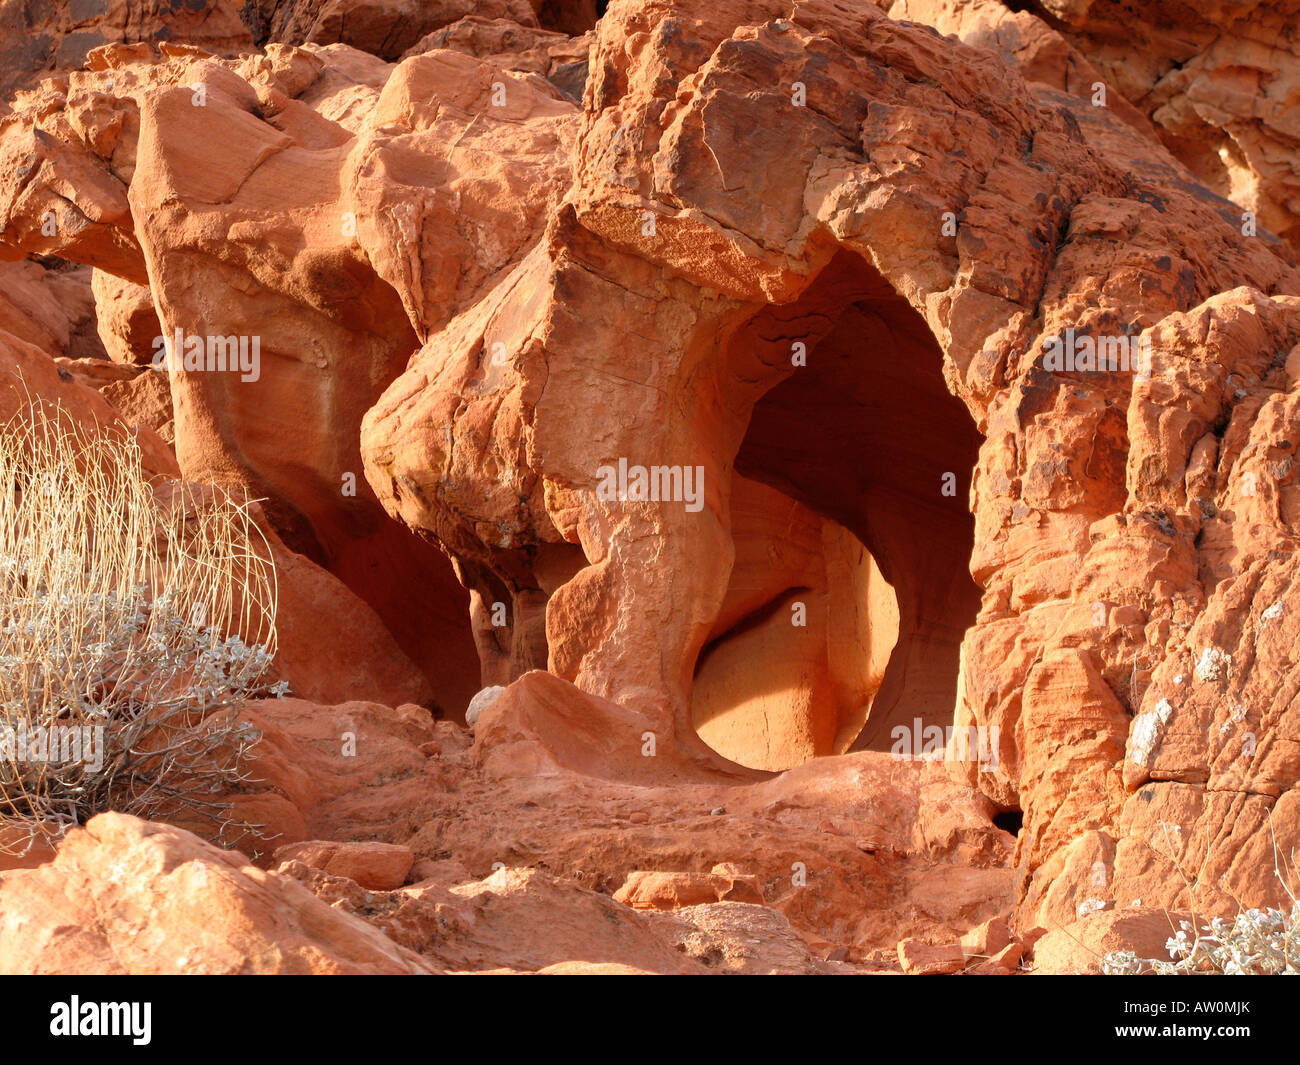 Arches formed by nature in red sandstone rock formations in Valley of Fire State Park in southern Nevada, USA Stock Photo